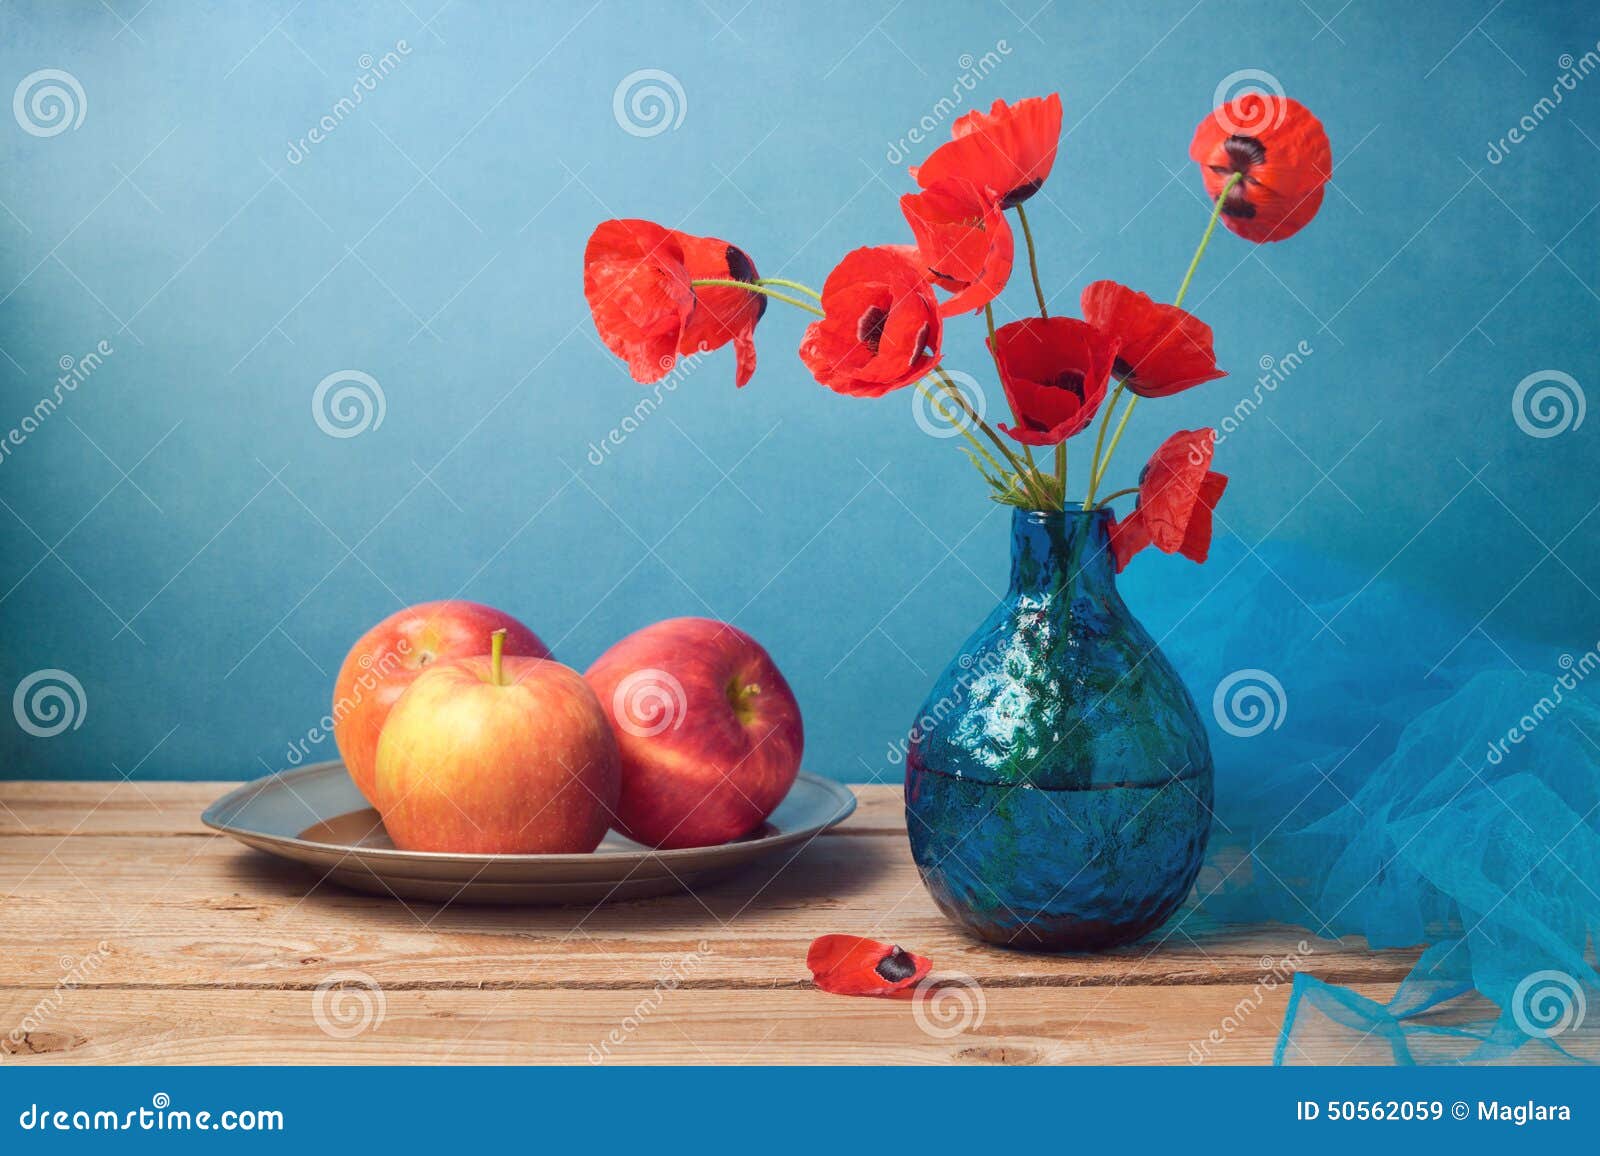 retro still life with poppies and apples